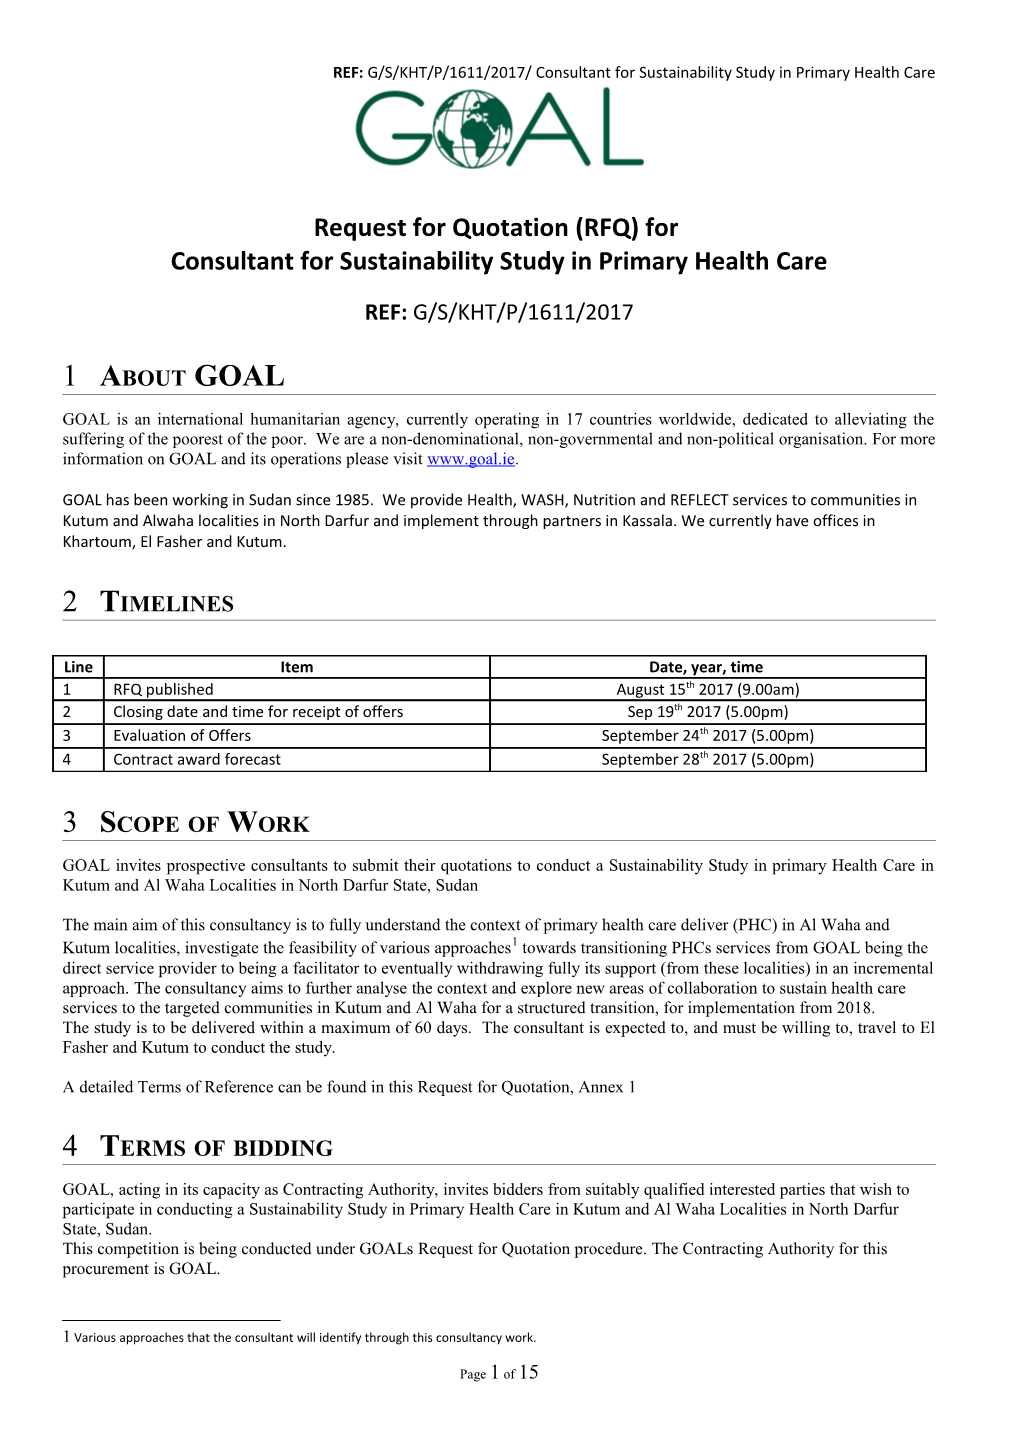 Consultant for Sustainability Study in Primary Health Care